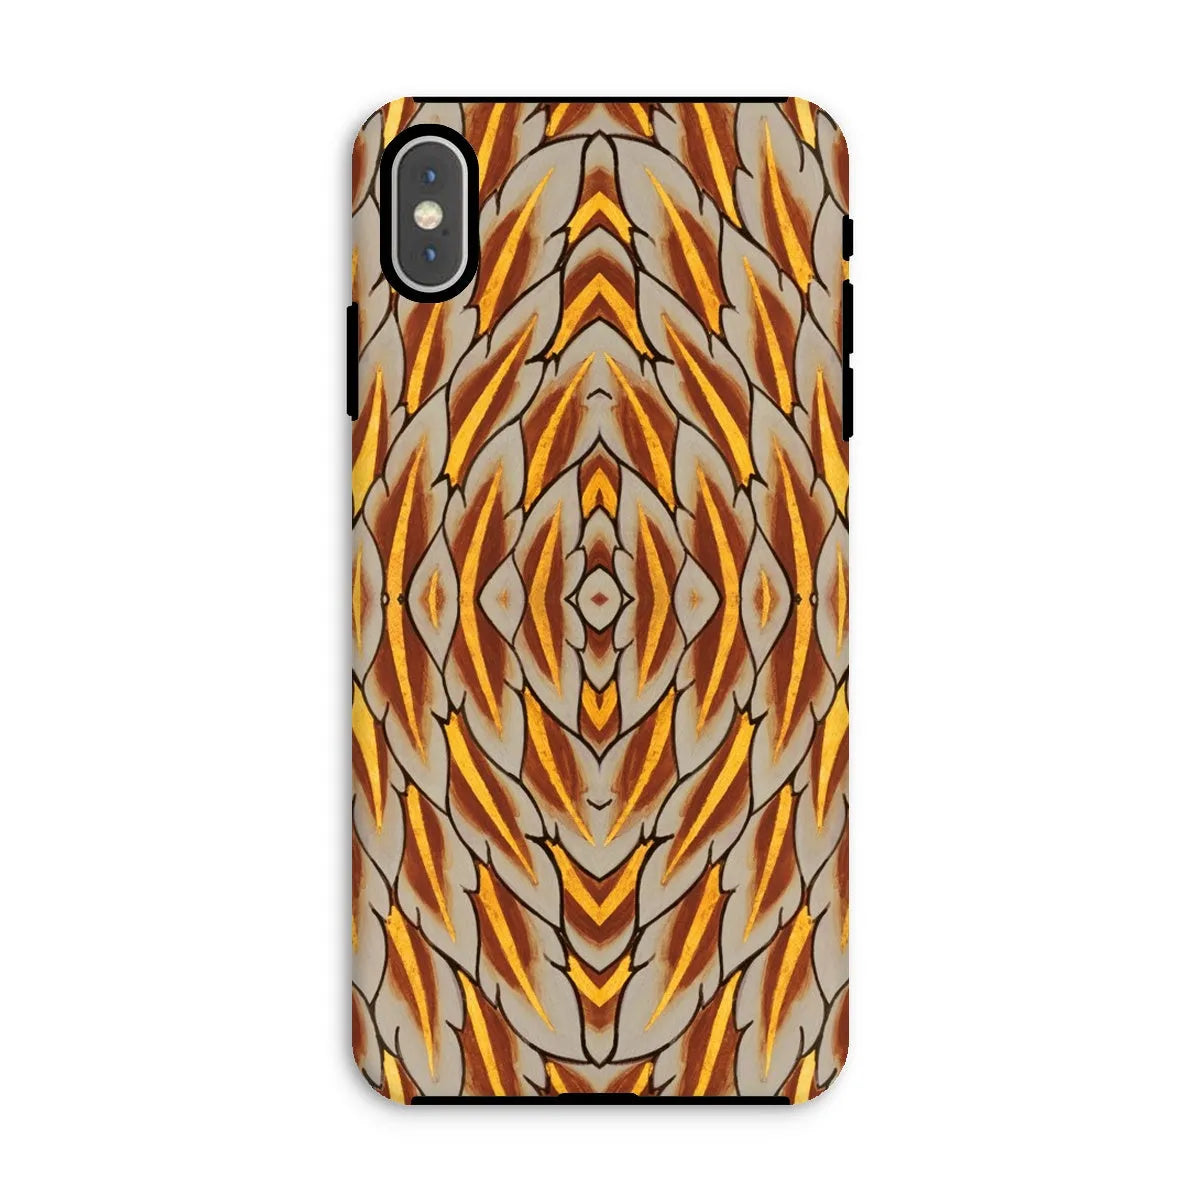 Featherweight Champion Thai Aesthetic Art Phone Case - Iphone Xs Max / Matte - Mobile Phone Cases - Aesthetic Art